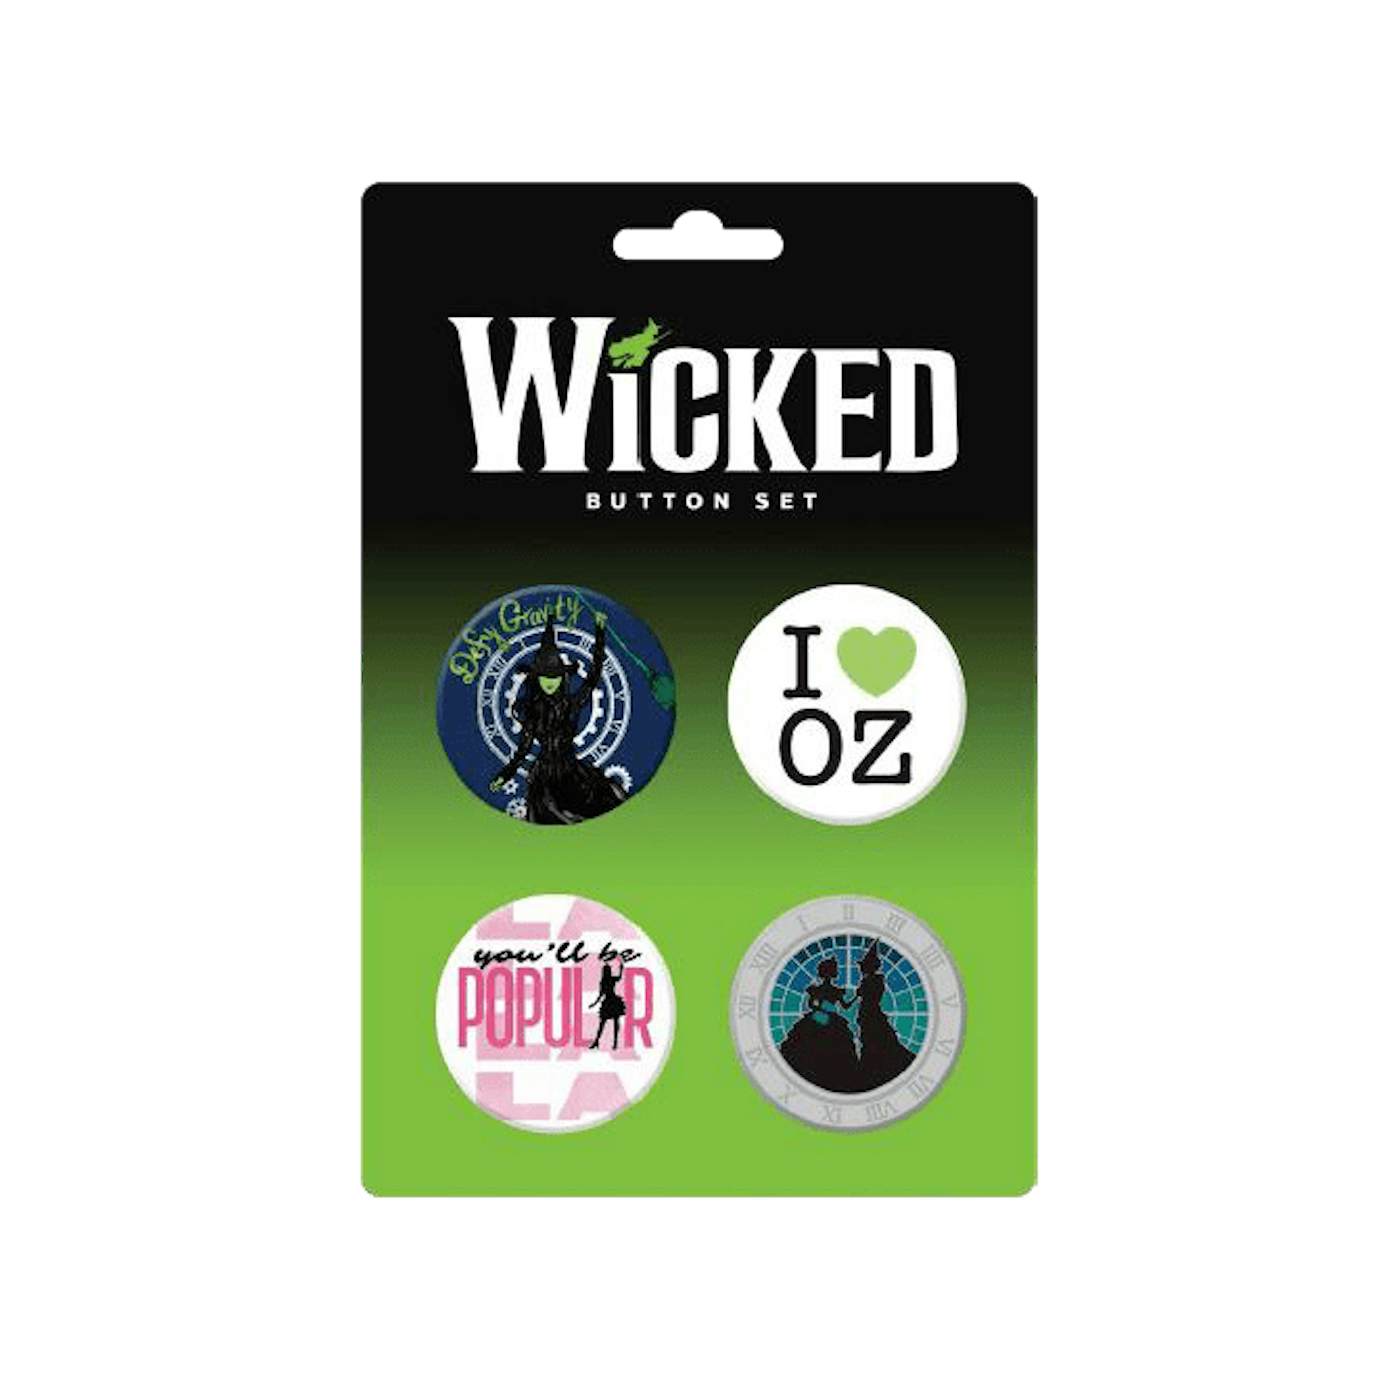 Green For Good, Tops, Wicked Musical Defy Gravity Short Sleeve Tee Shirt